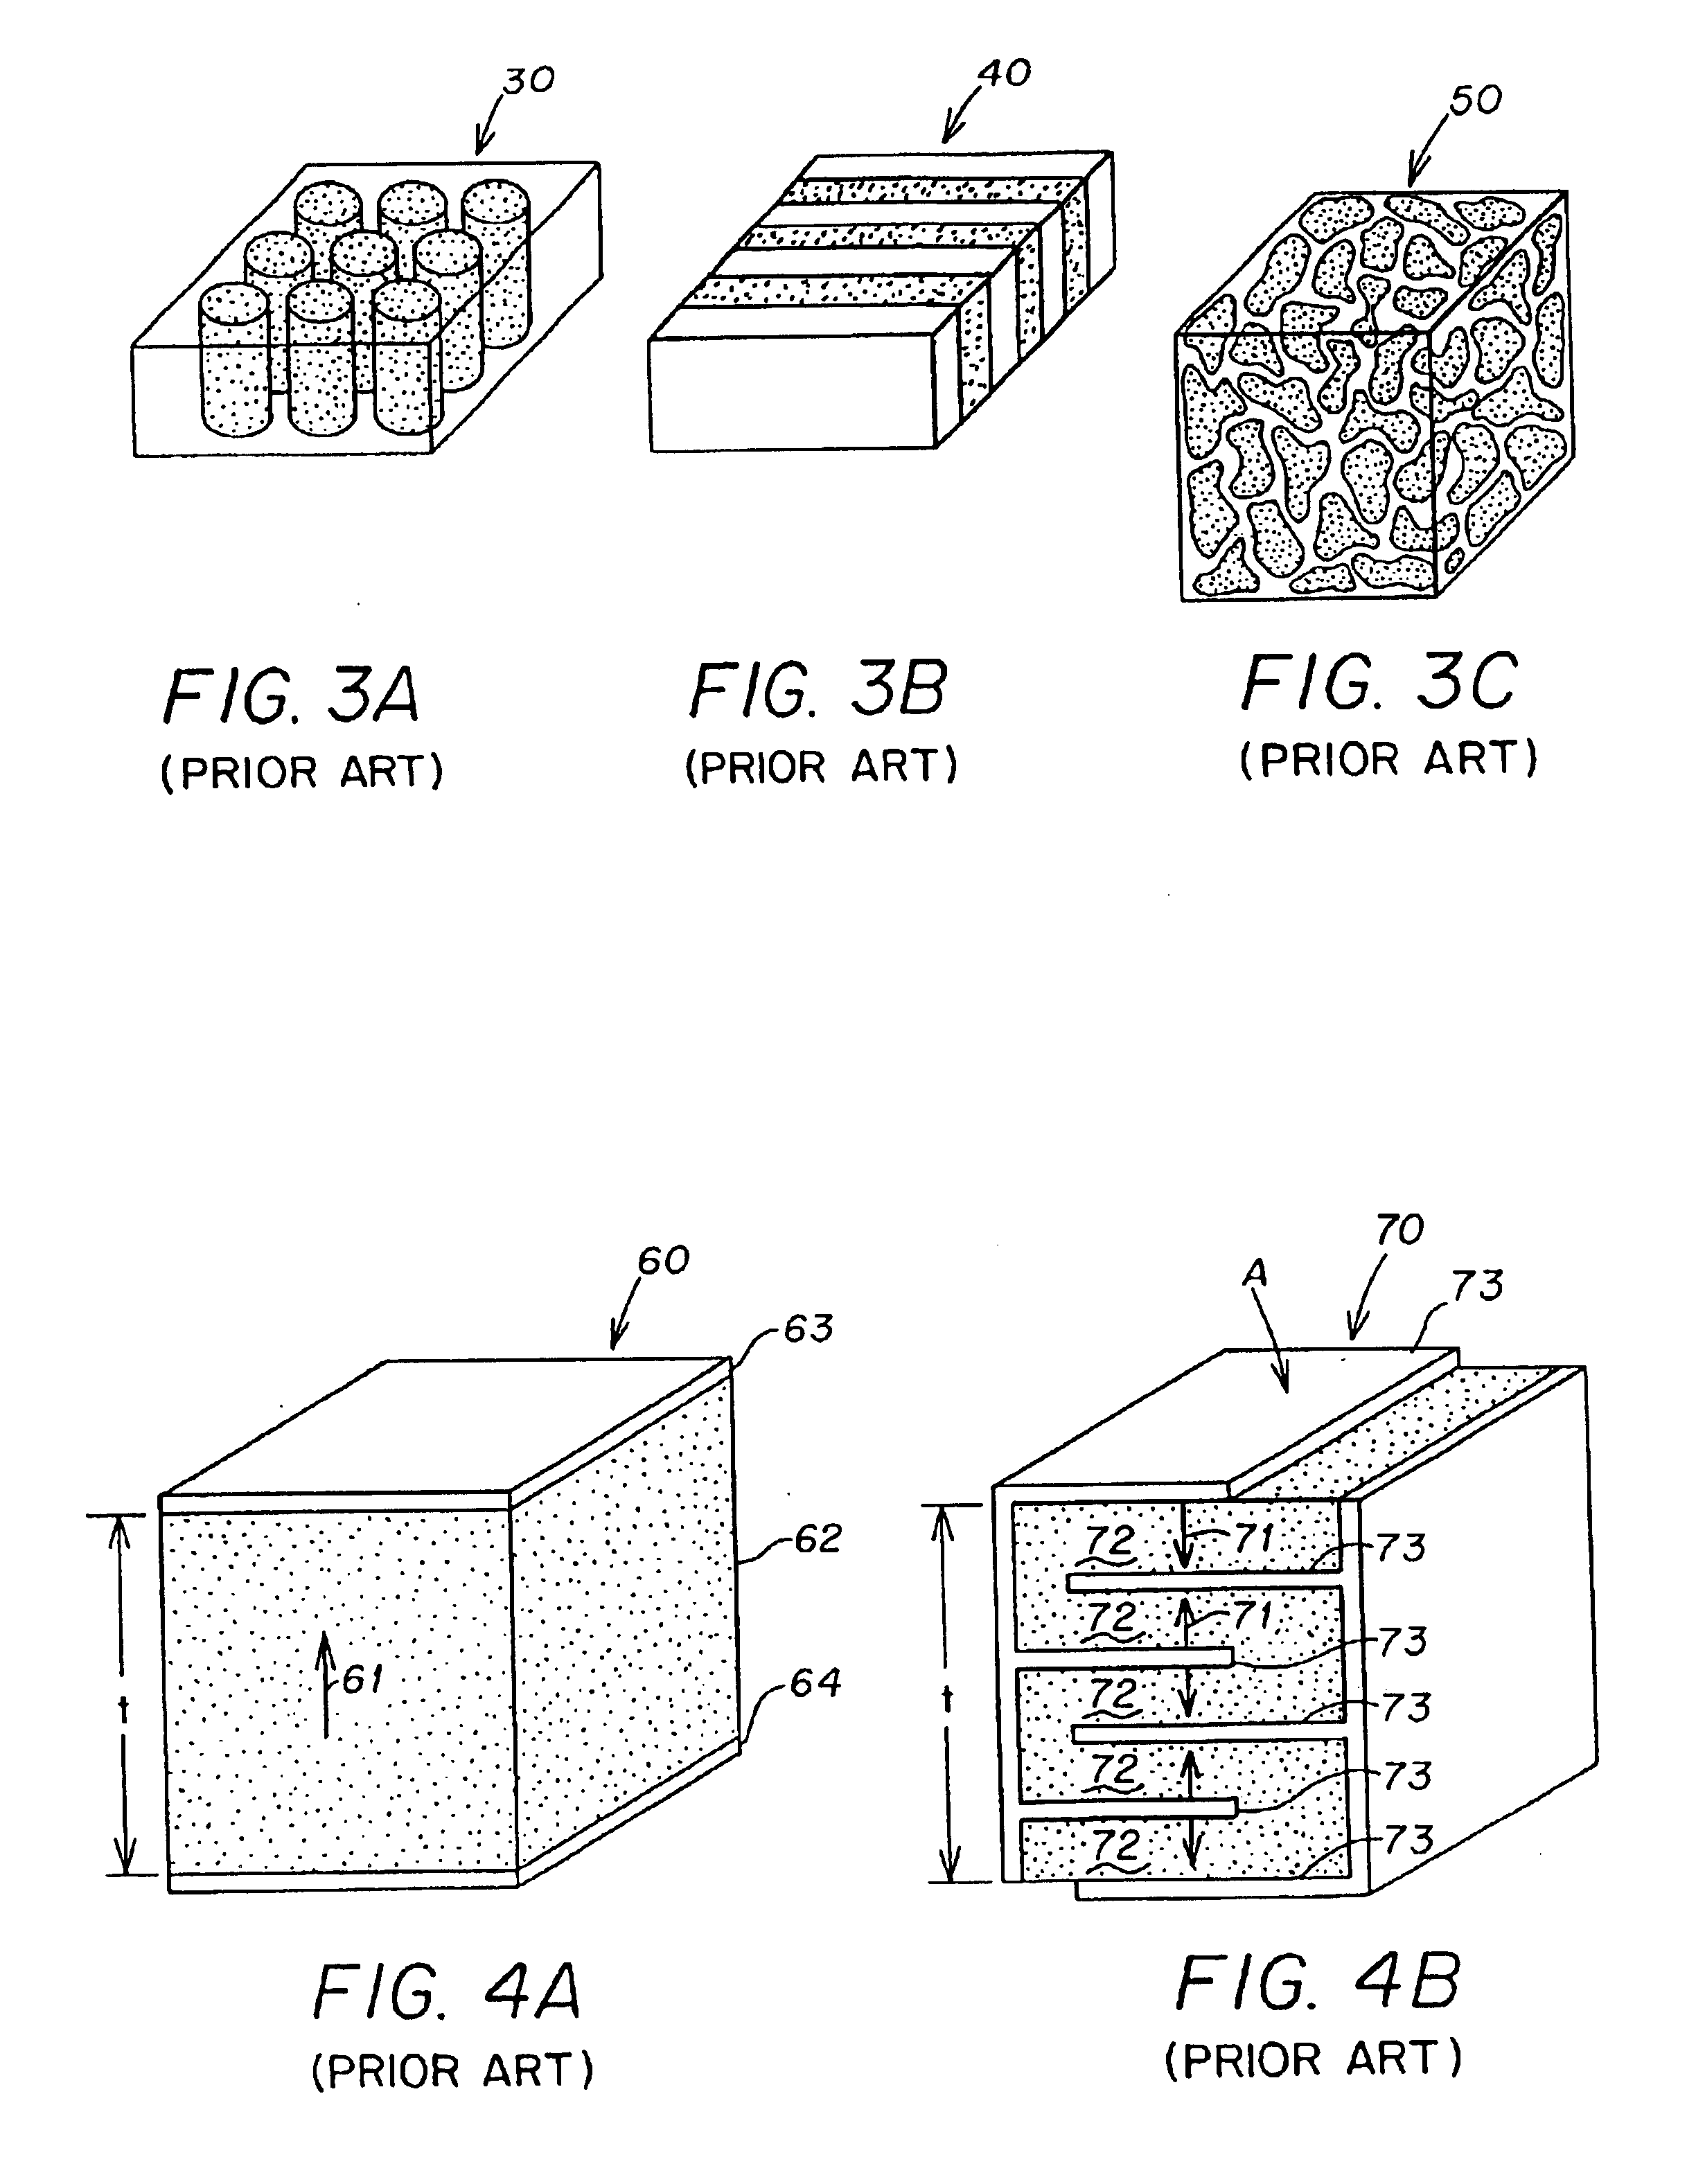 Method for making a transducer